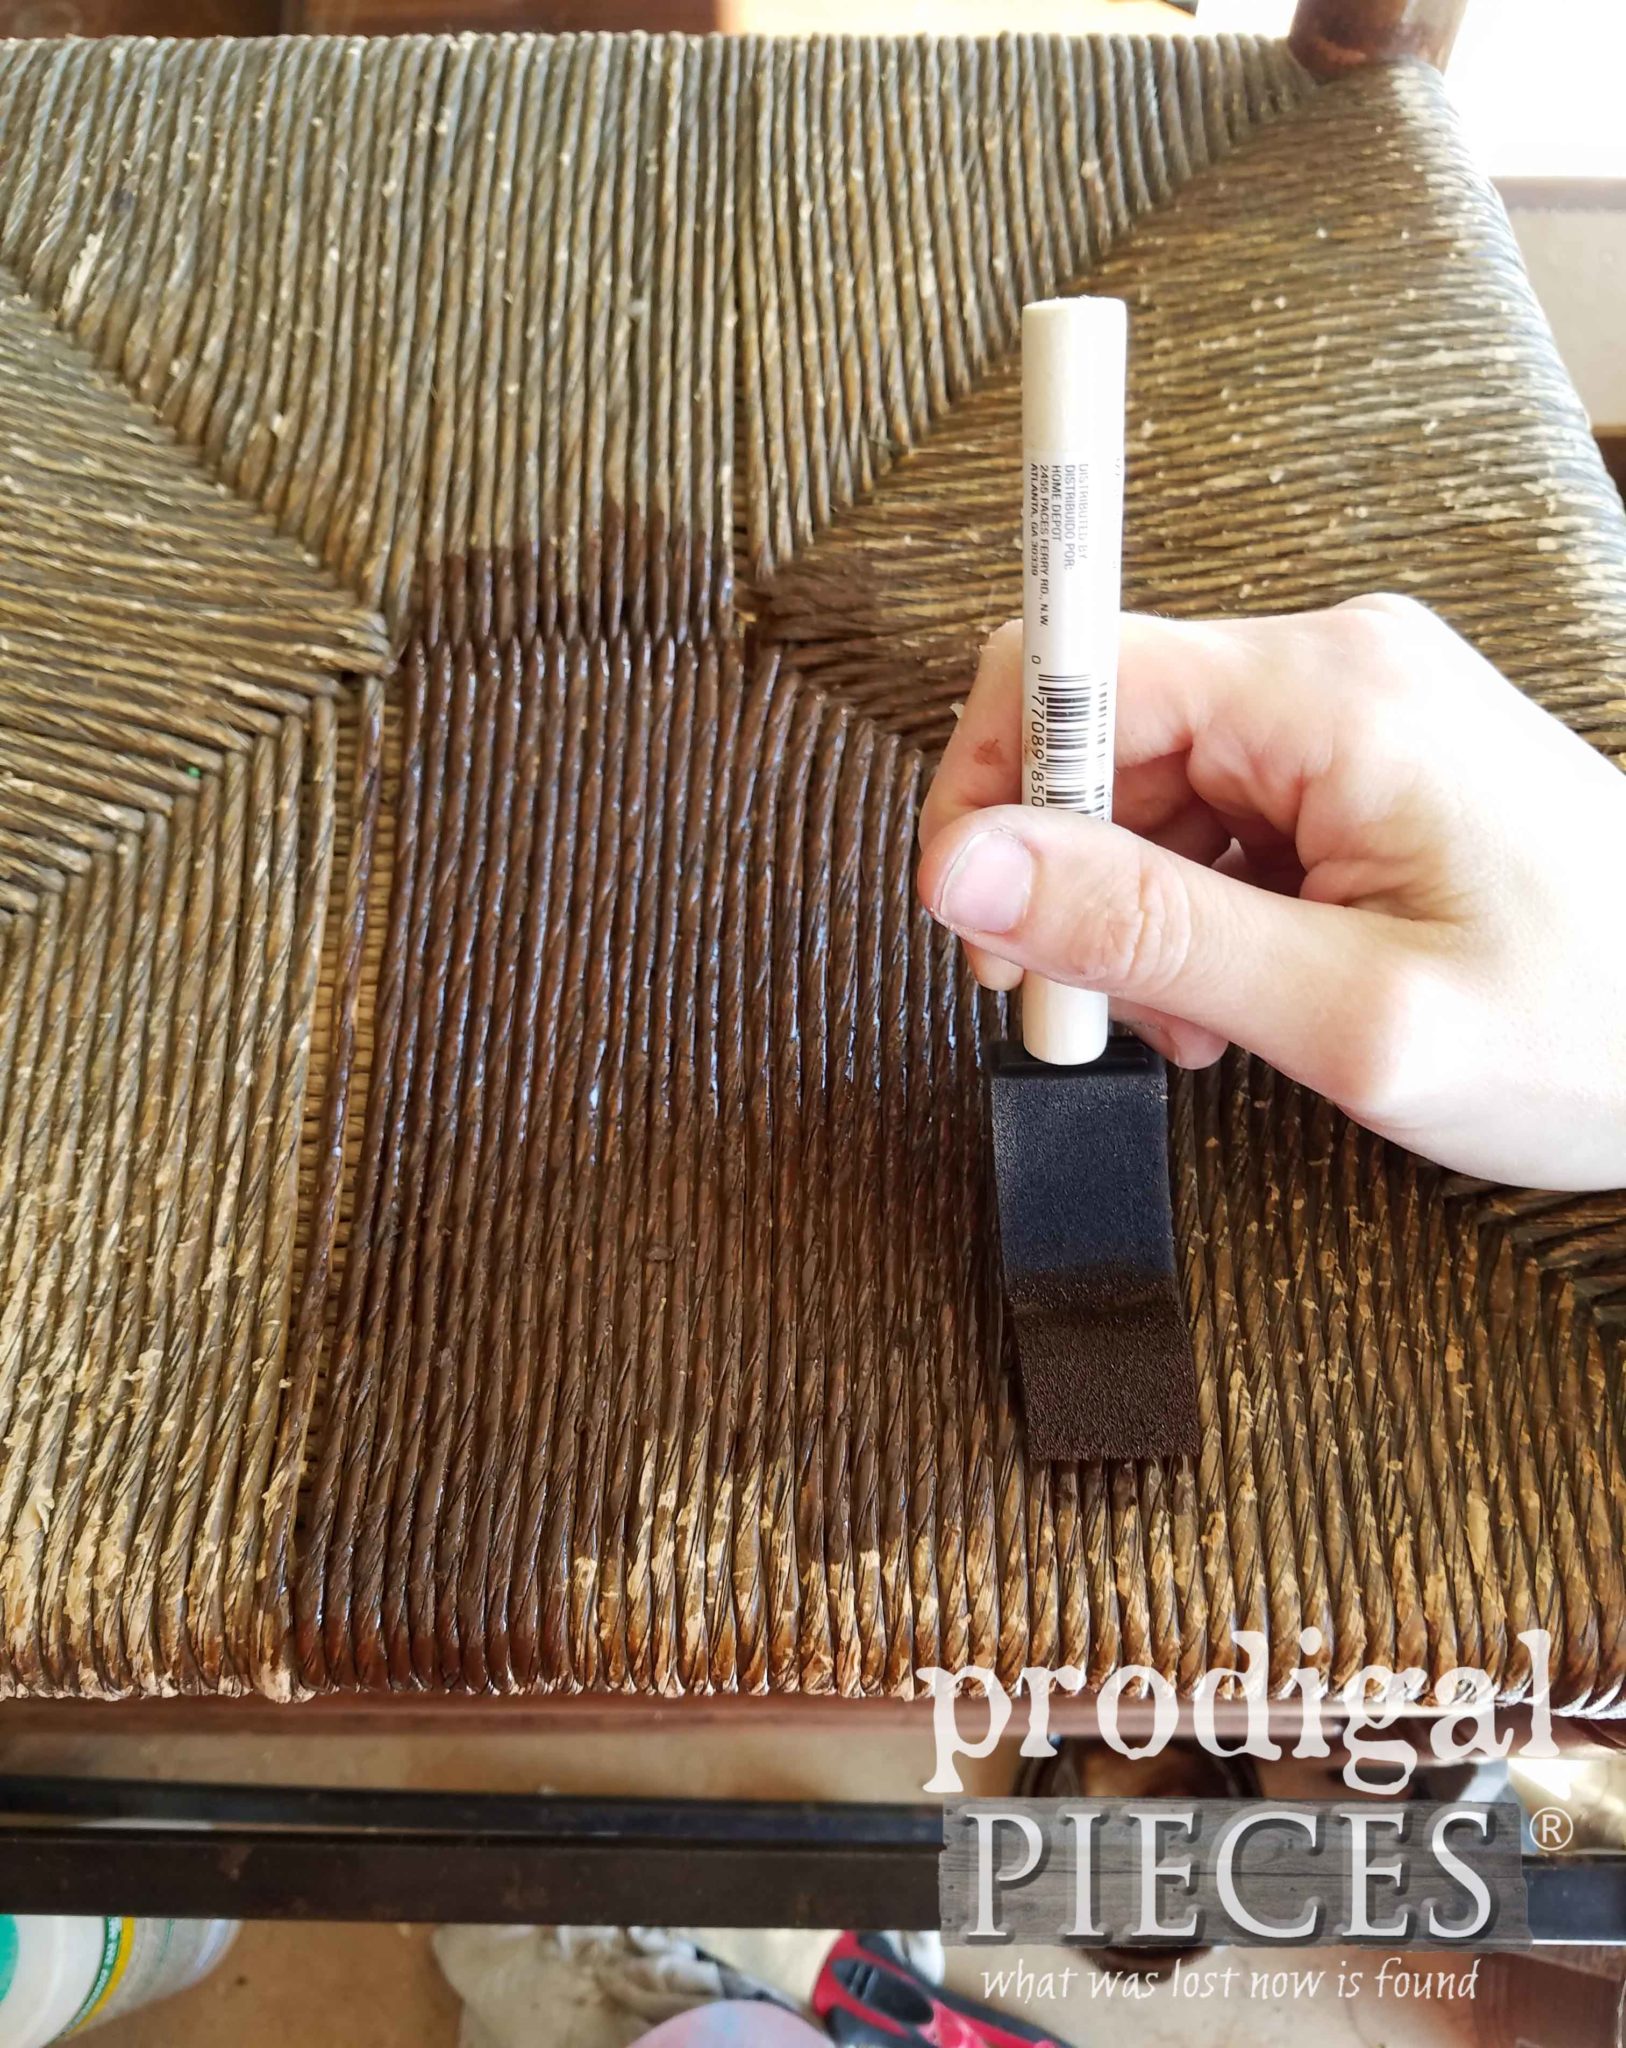 Staining Rush Chair Seat with Early American Stain | prodigalpieces.com